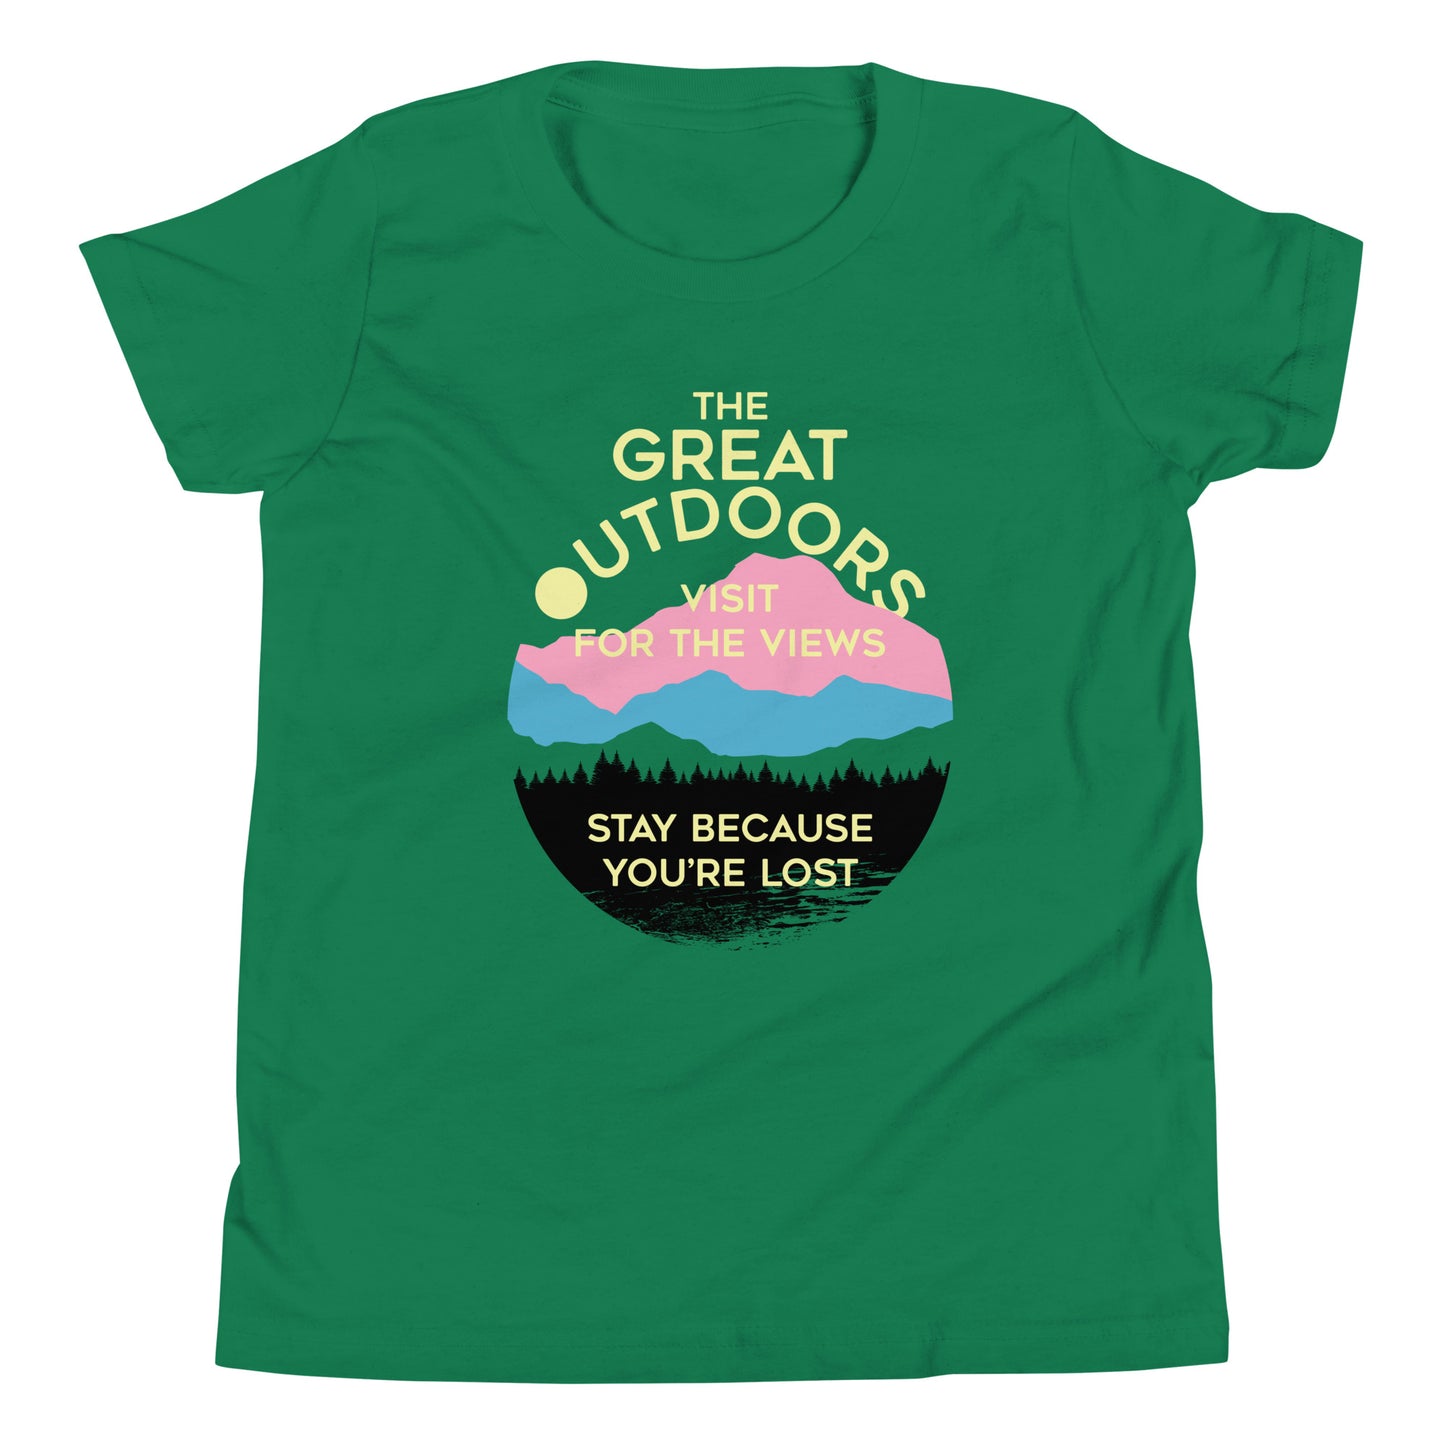 The Great Outdoors Kid's Youth Tee